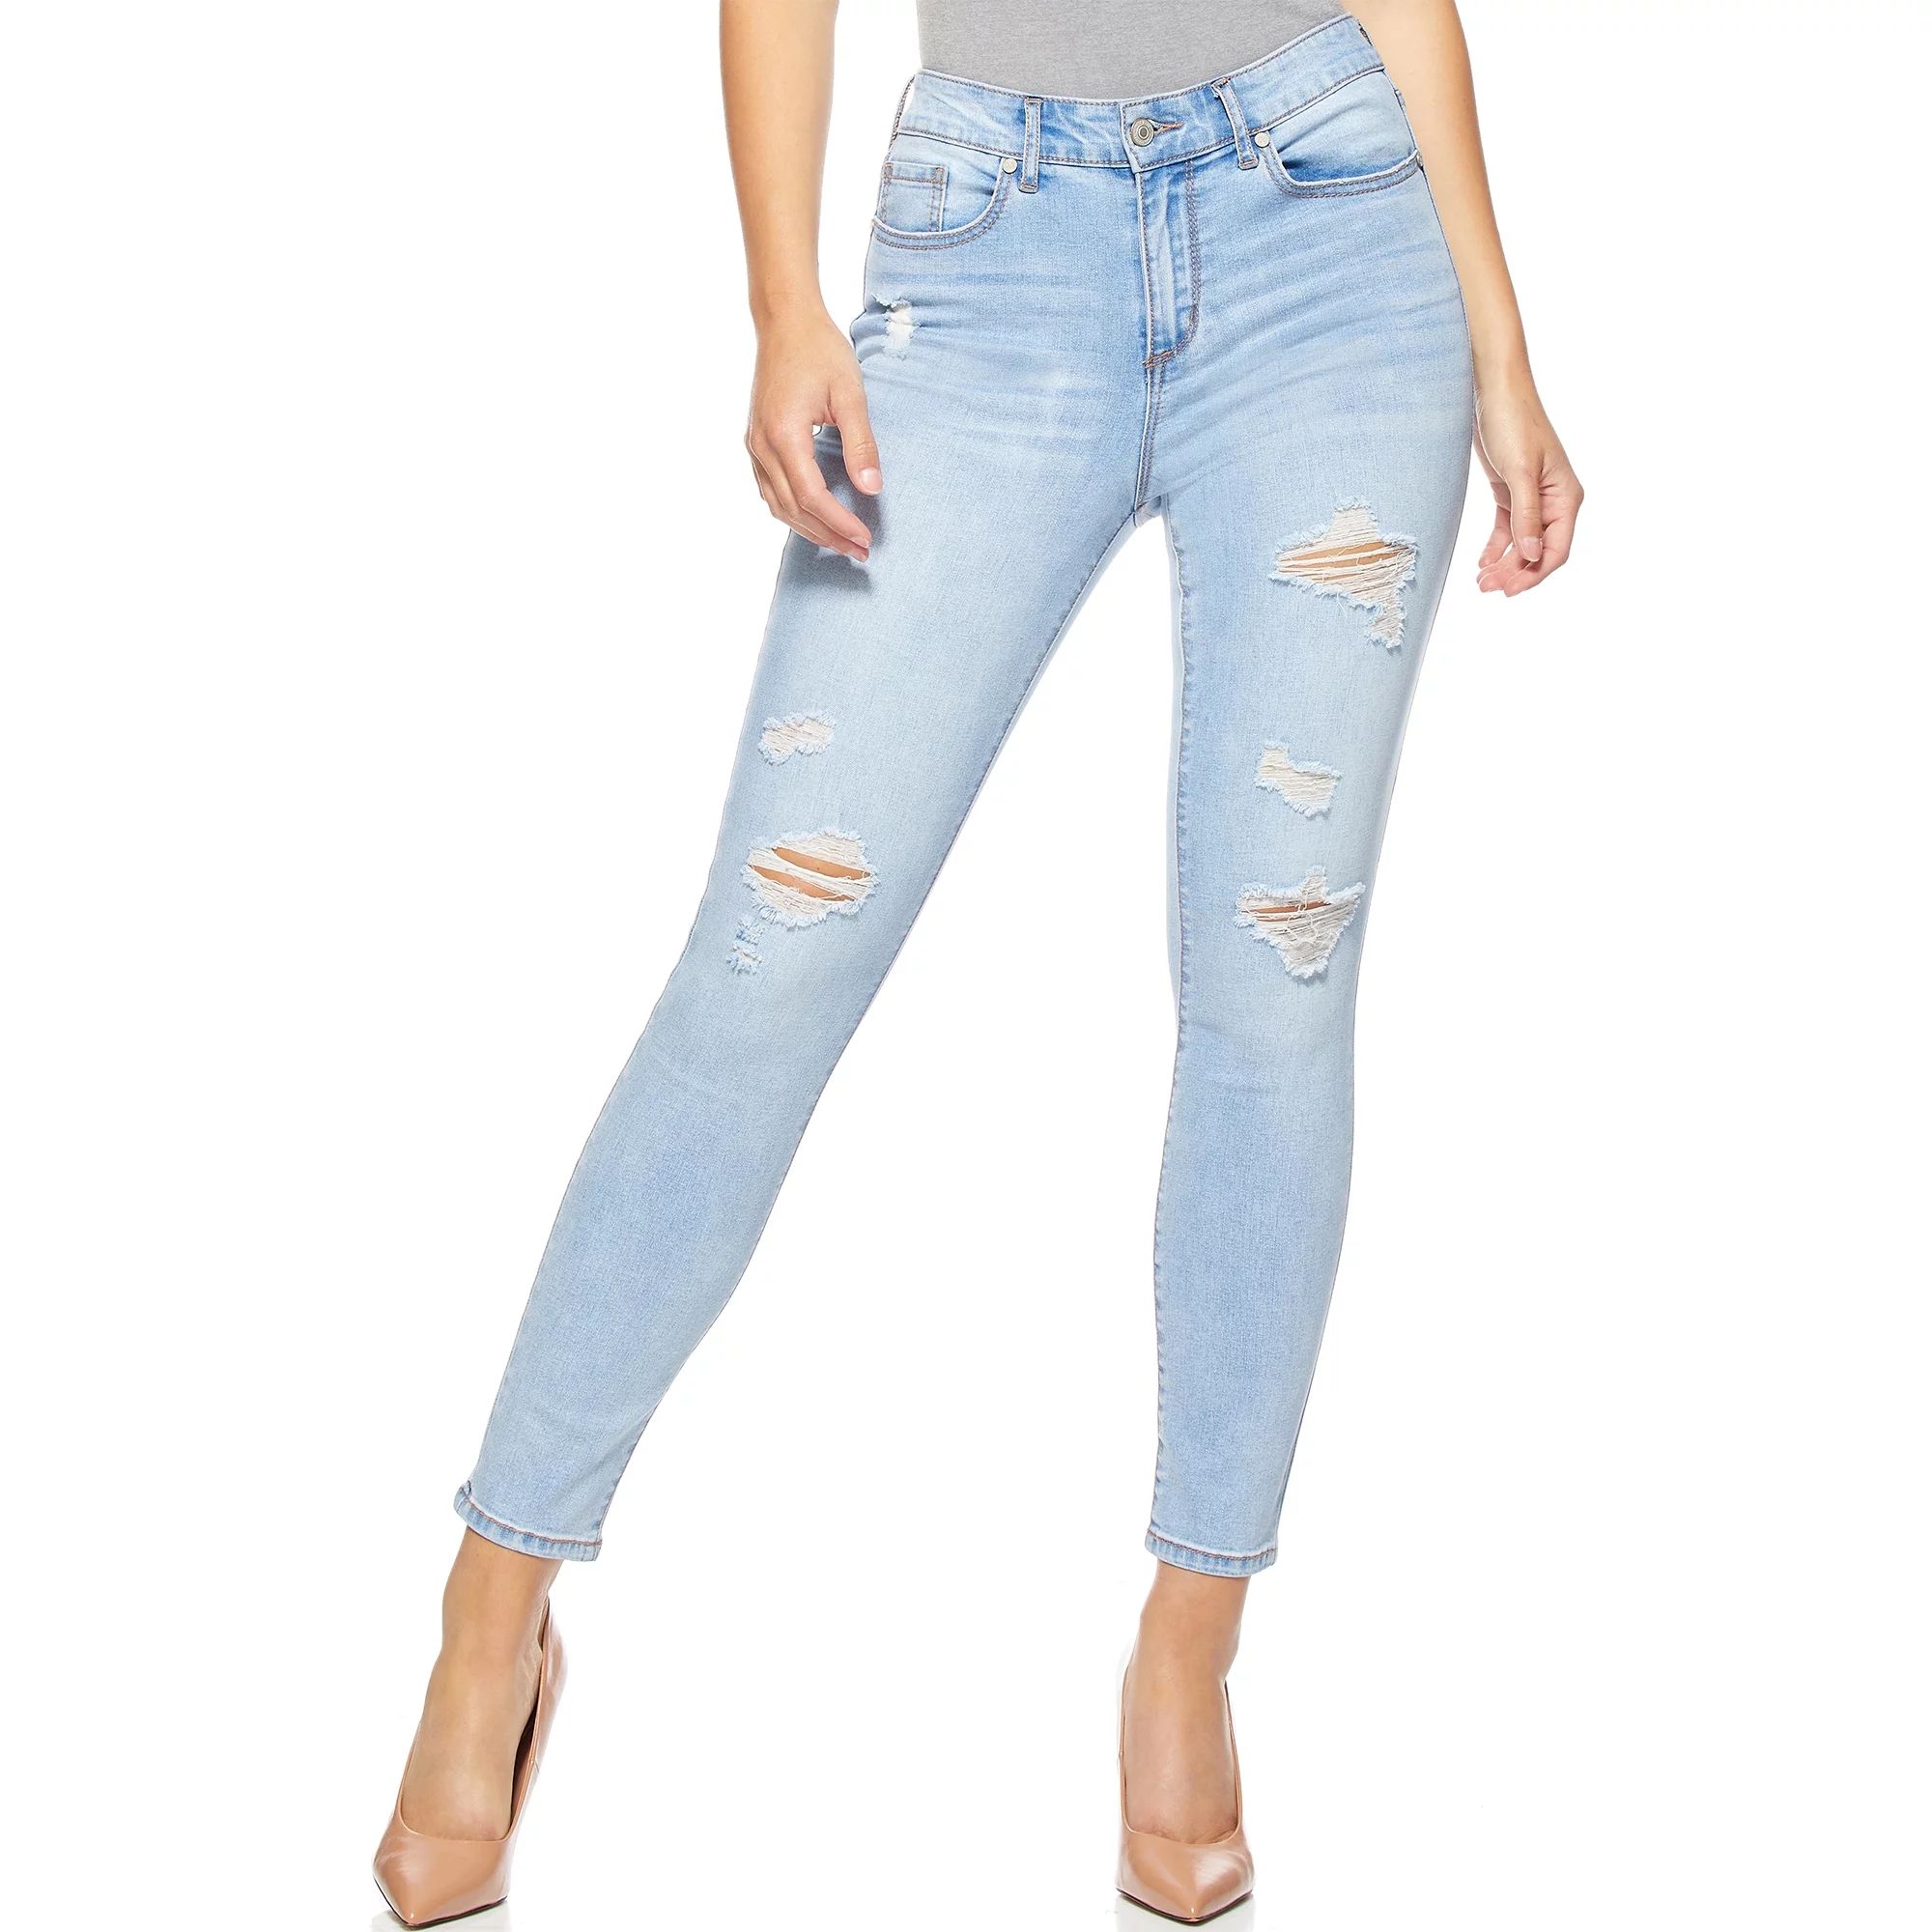 Sofia Jeans Women's Rosa Curvy High Rise Destructed Skinny Ankle Jeans | Walmart (US)